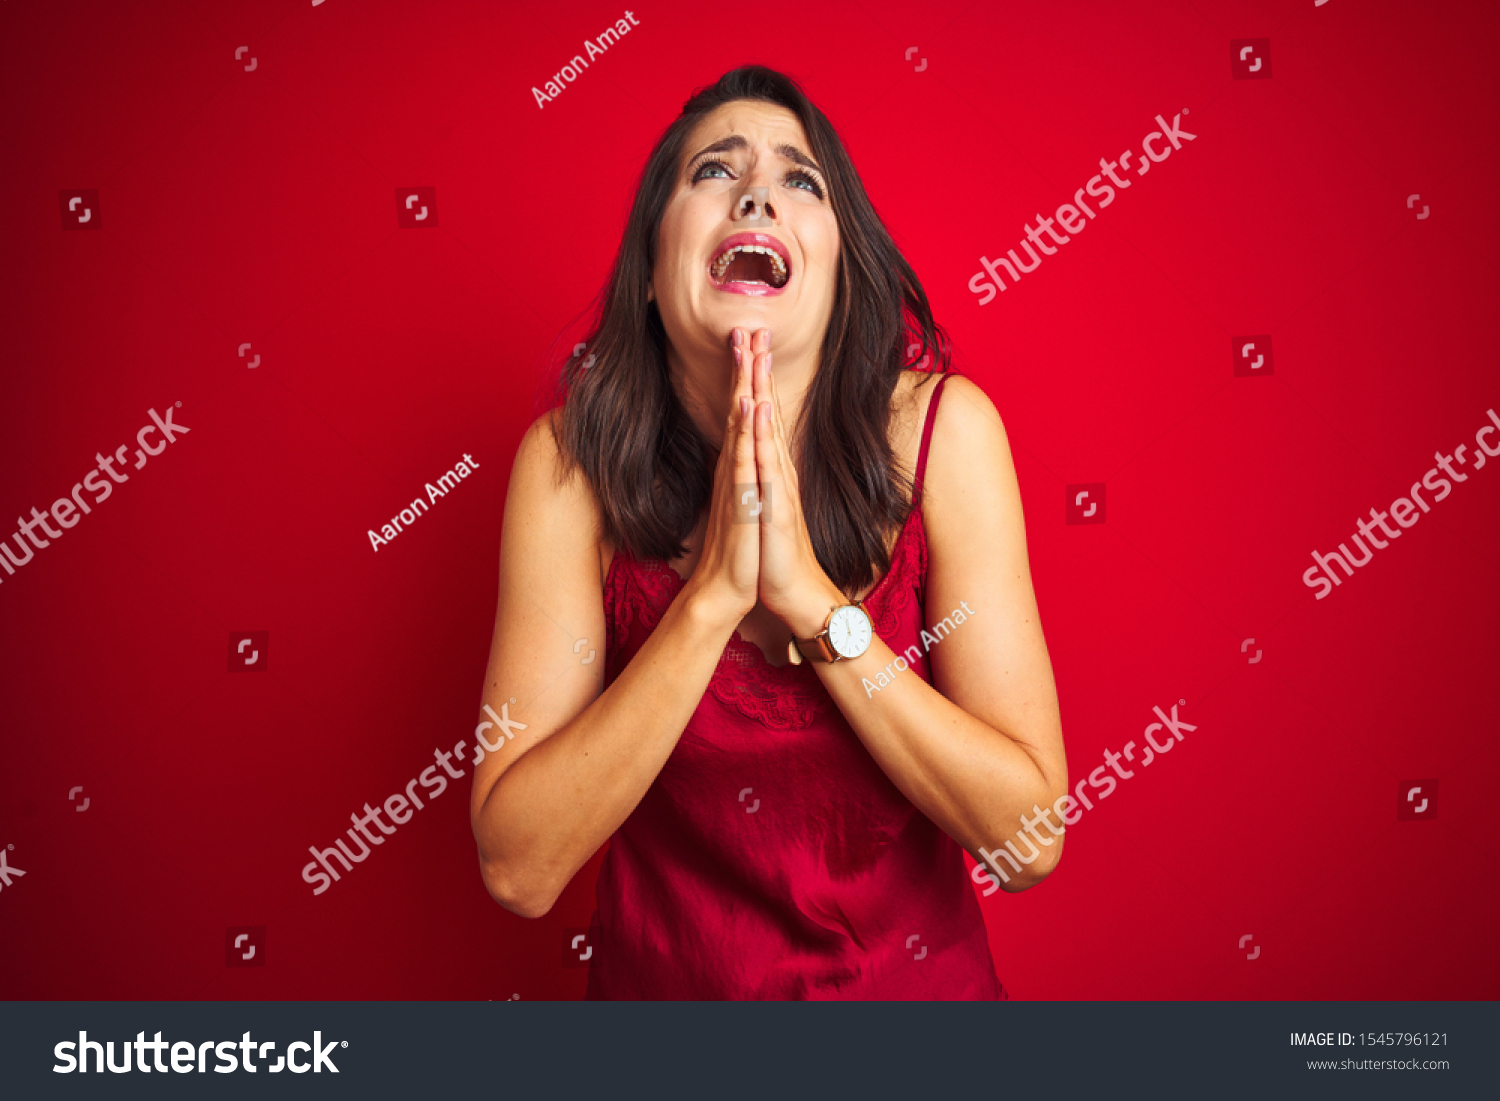 Young beautiful woman wearing sexy lingerie over red isolated background begging and praying with hands together with hope expression on face very emotional and worried. Asking for forgiveness.  #1545796121